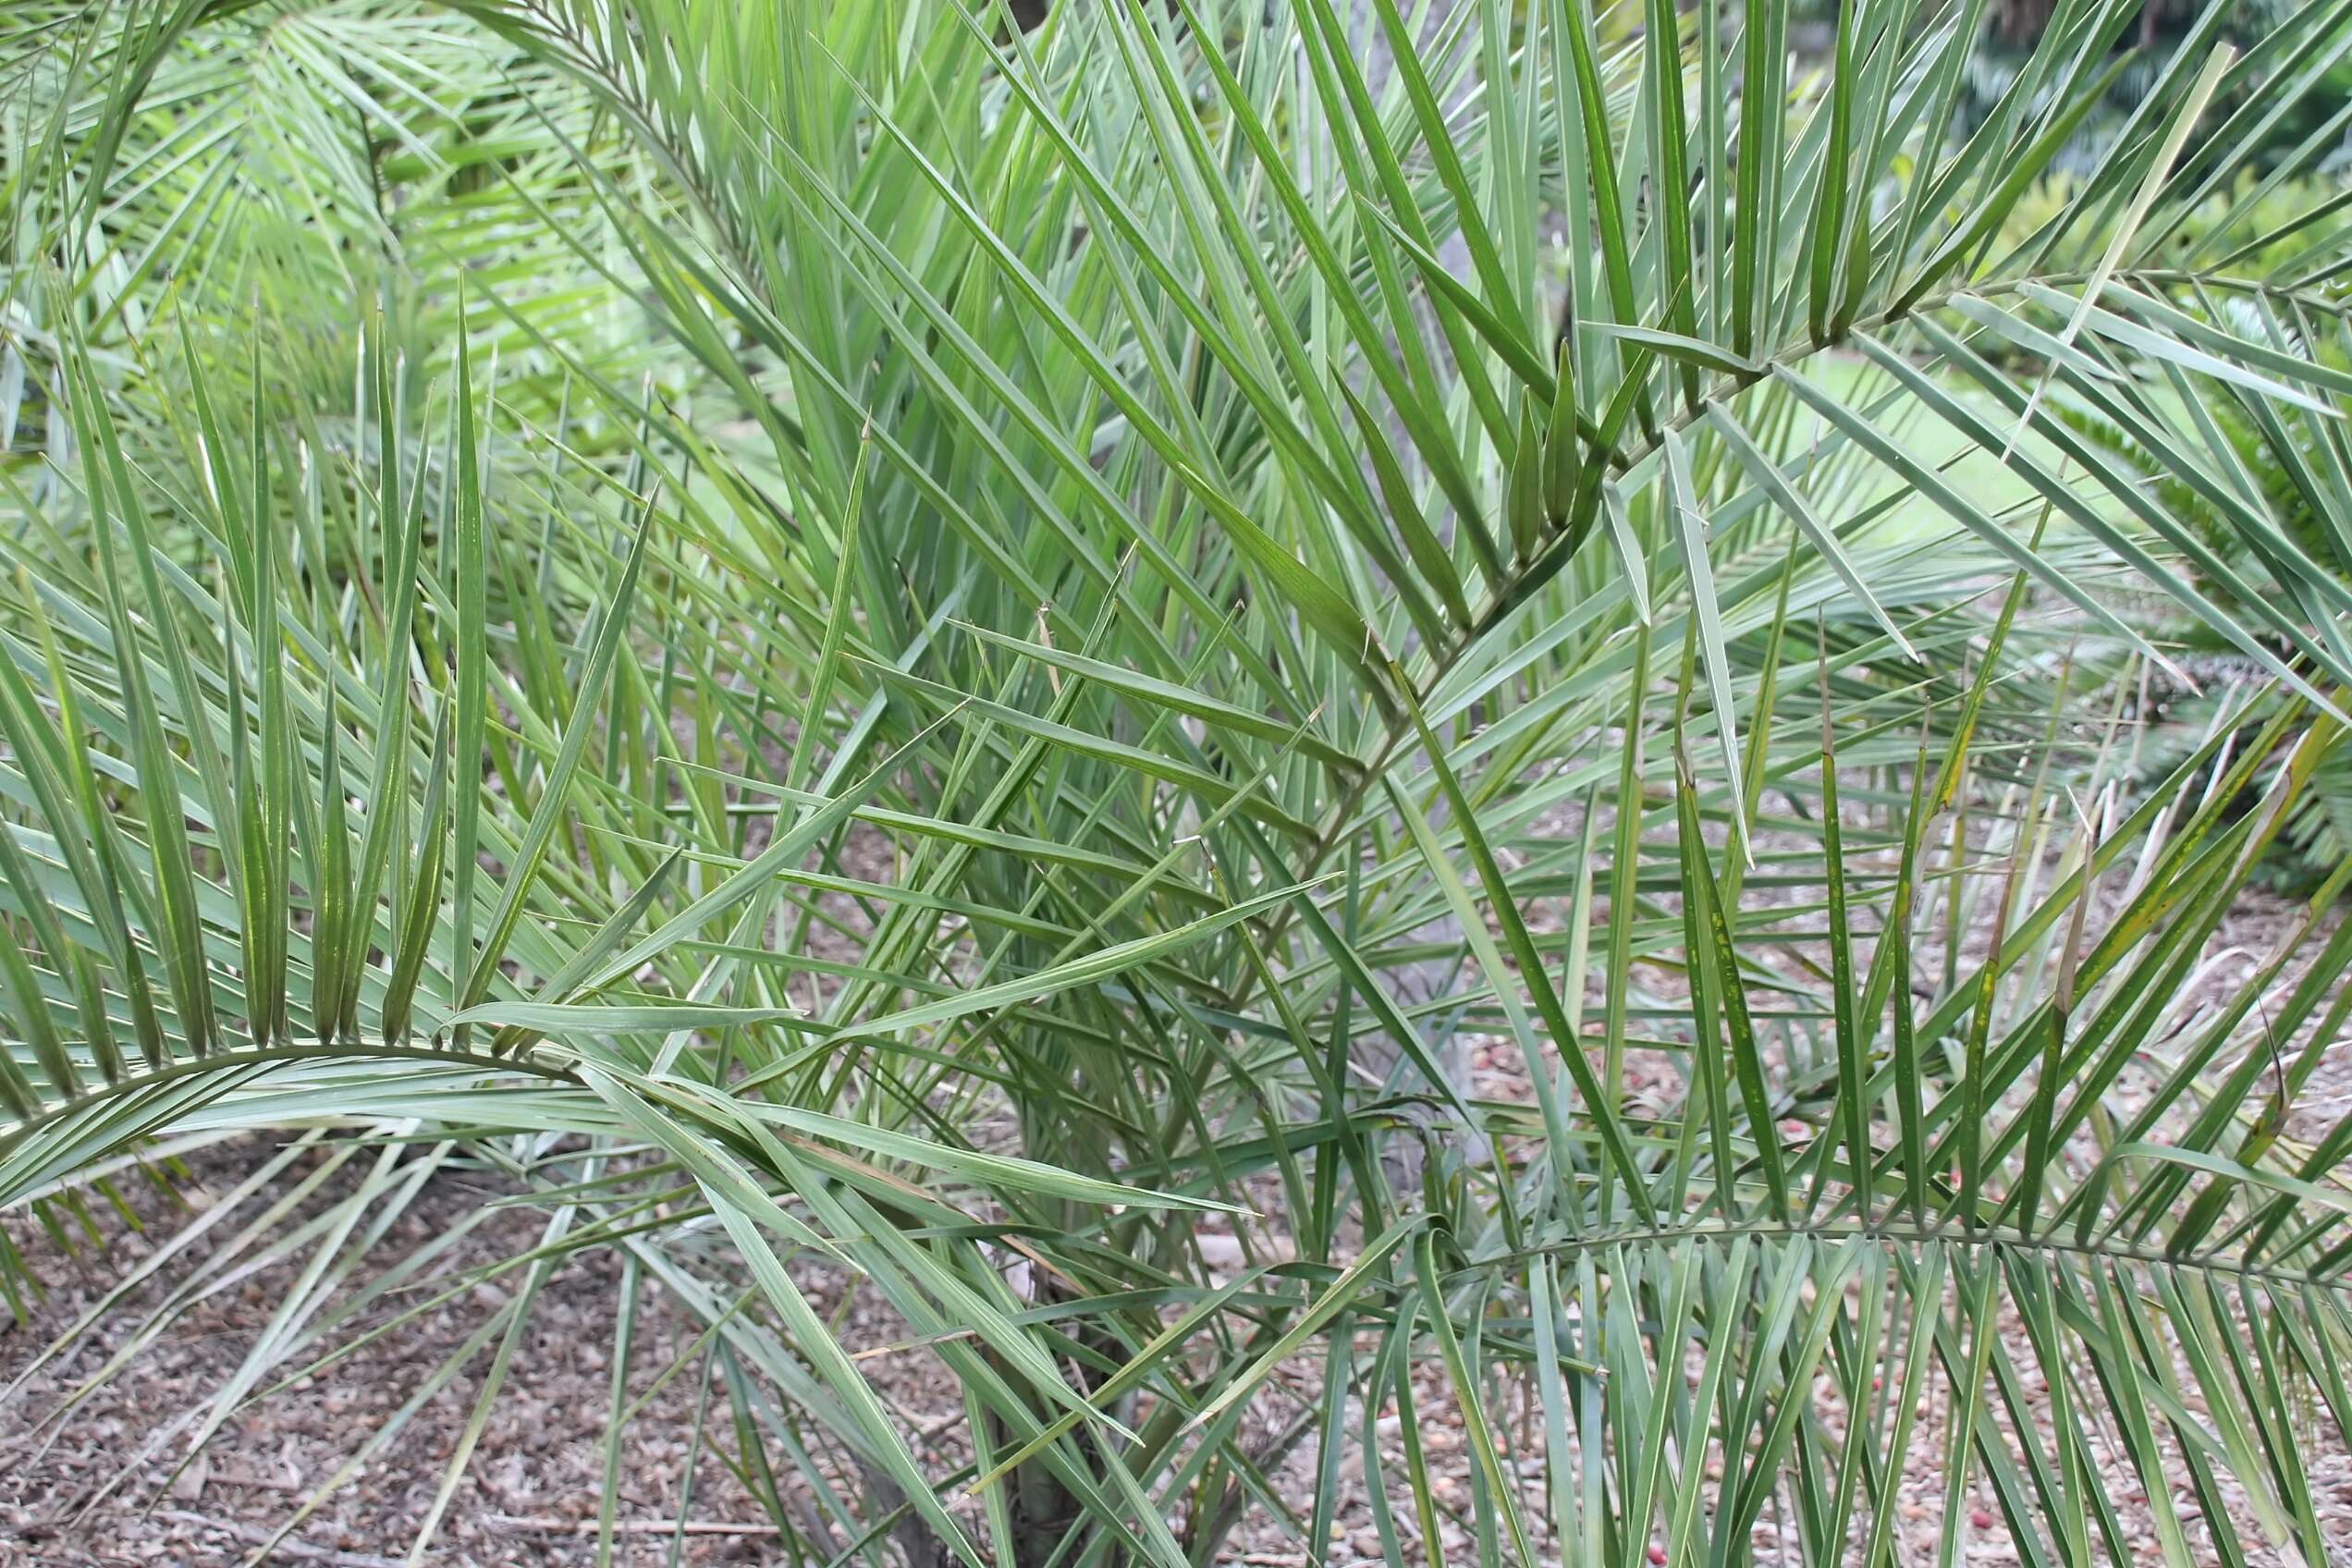 Image of Ouricury palm